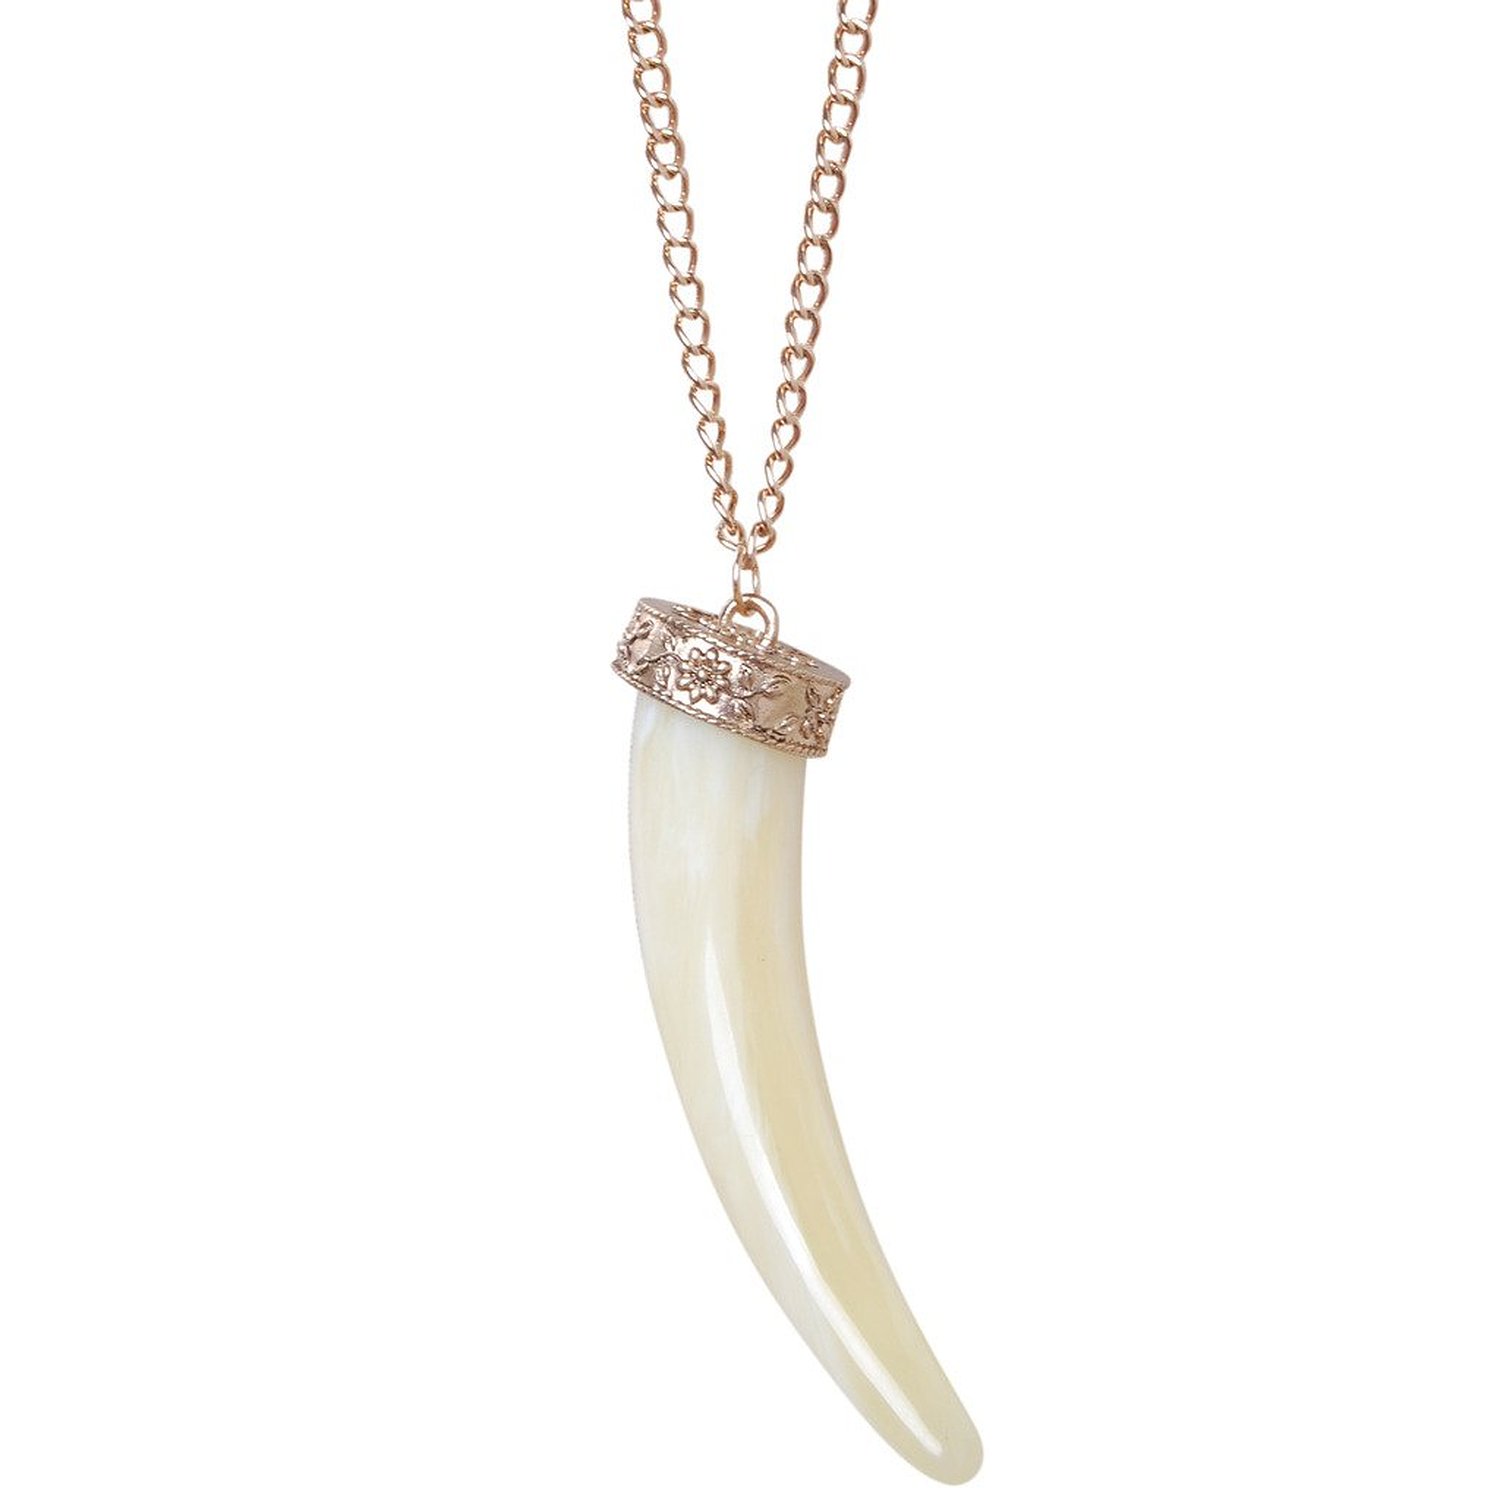 Humble Chic Women's Safari Necklace - Long Chain Necklace Faux Ivory Horn Tusk Pendant